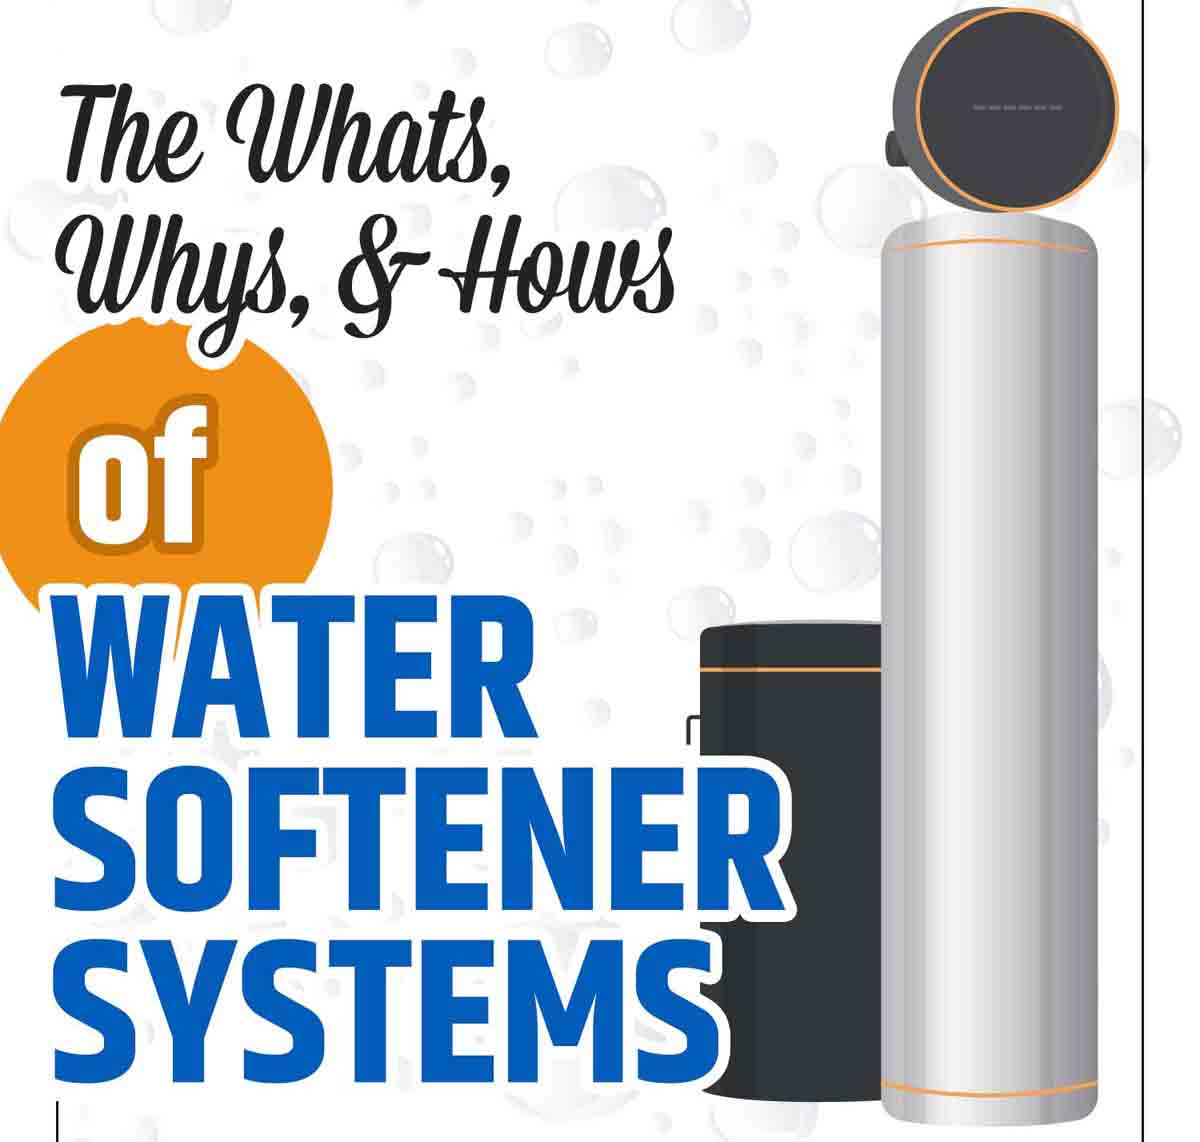 The Whats, Whys, & Hows of Water Softener Systems